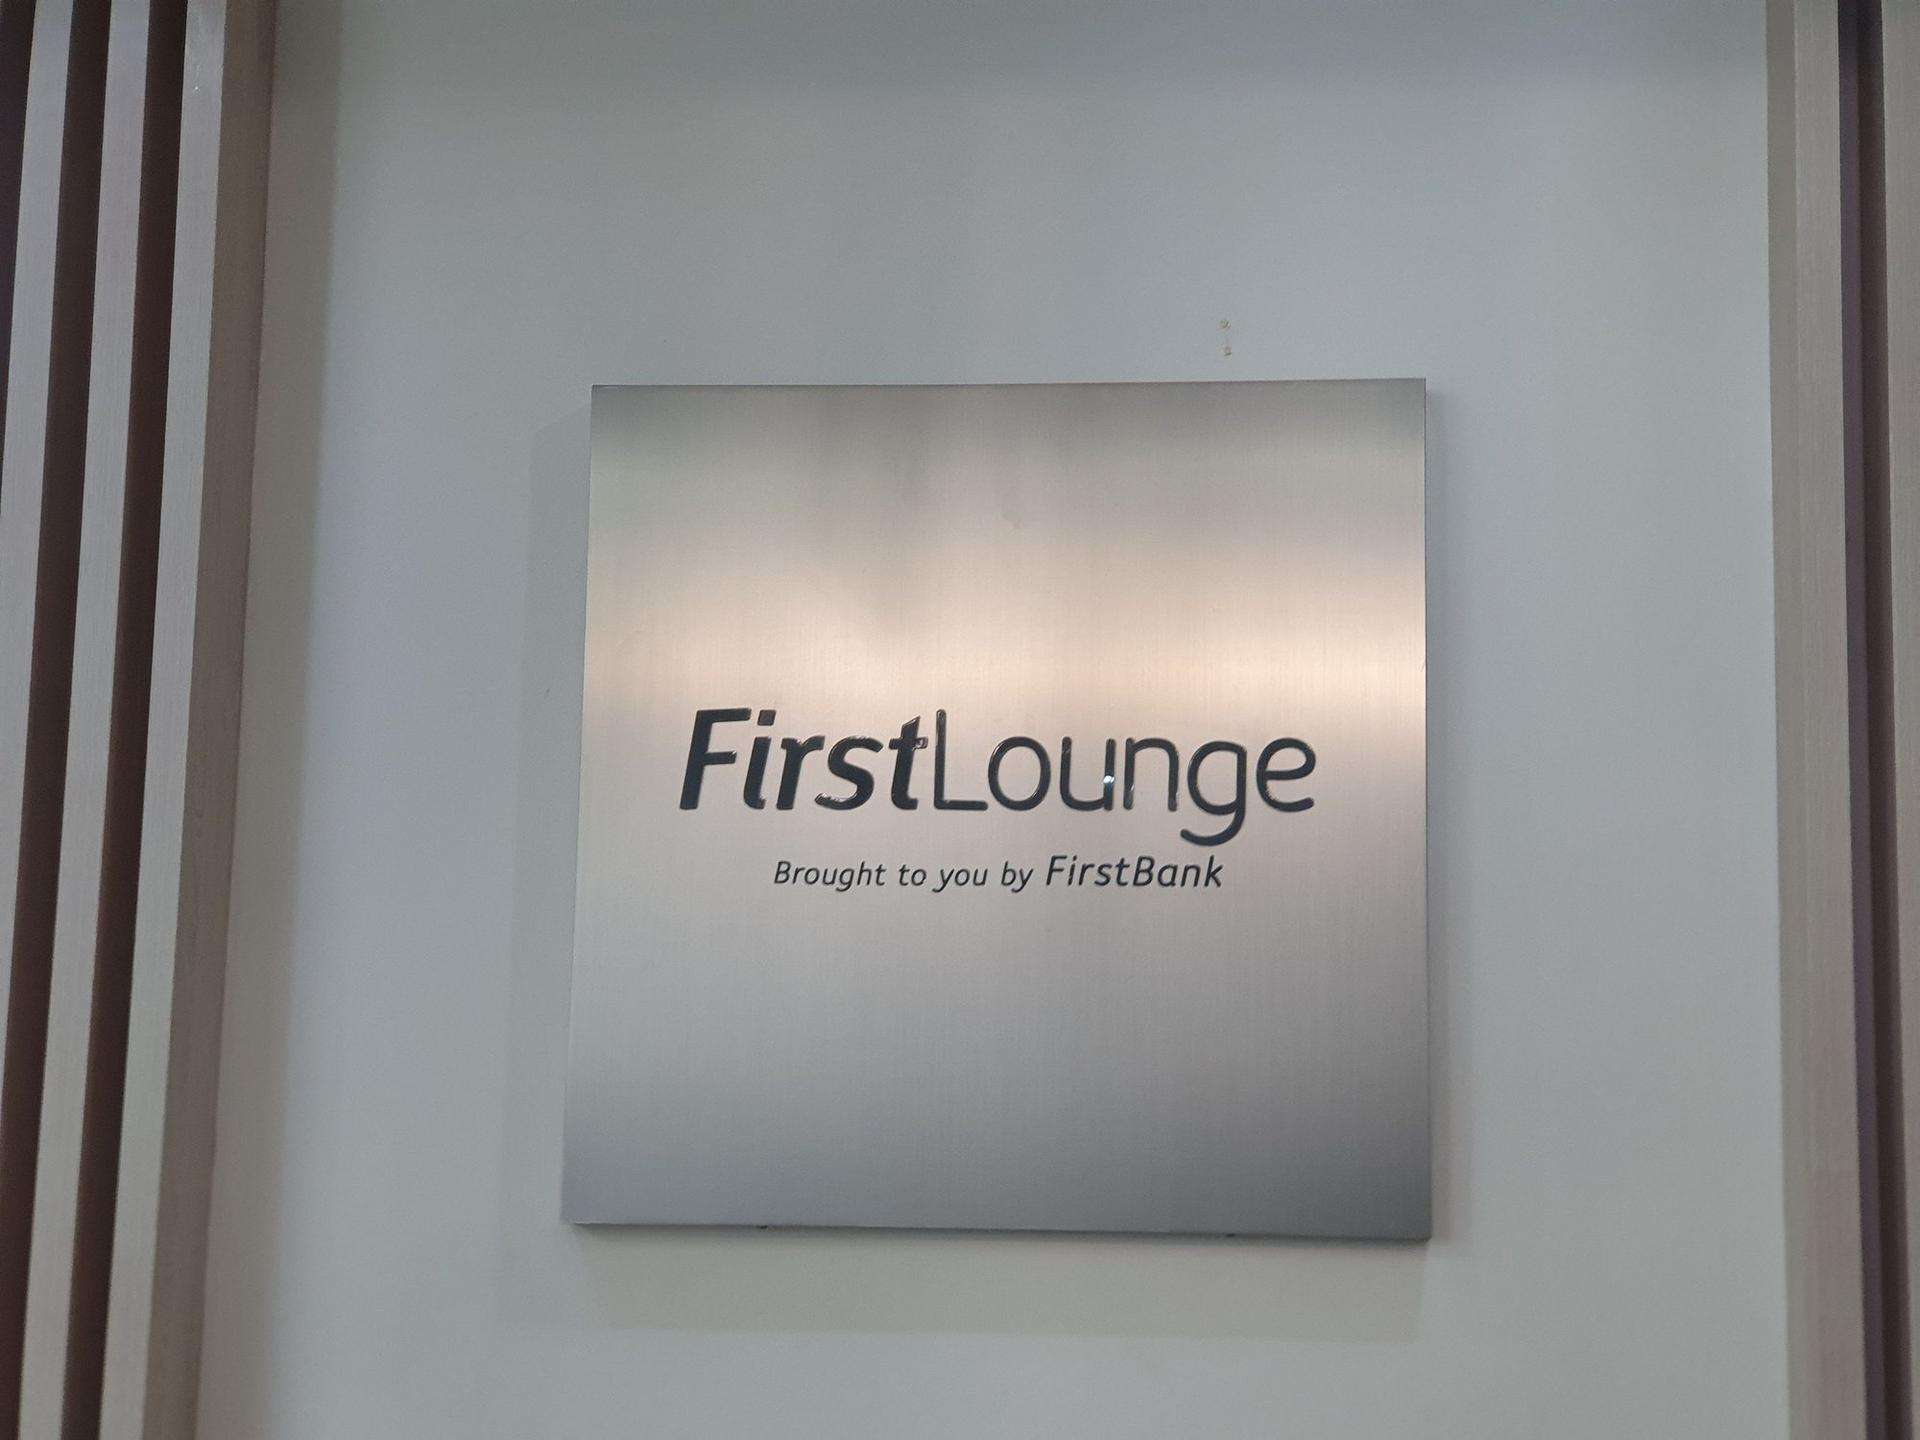 First Lounge image 11 of 28